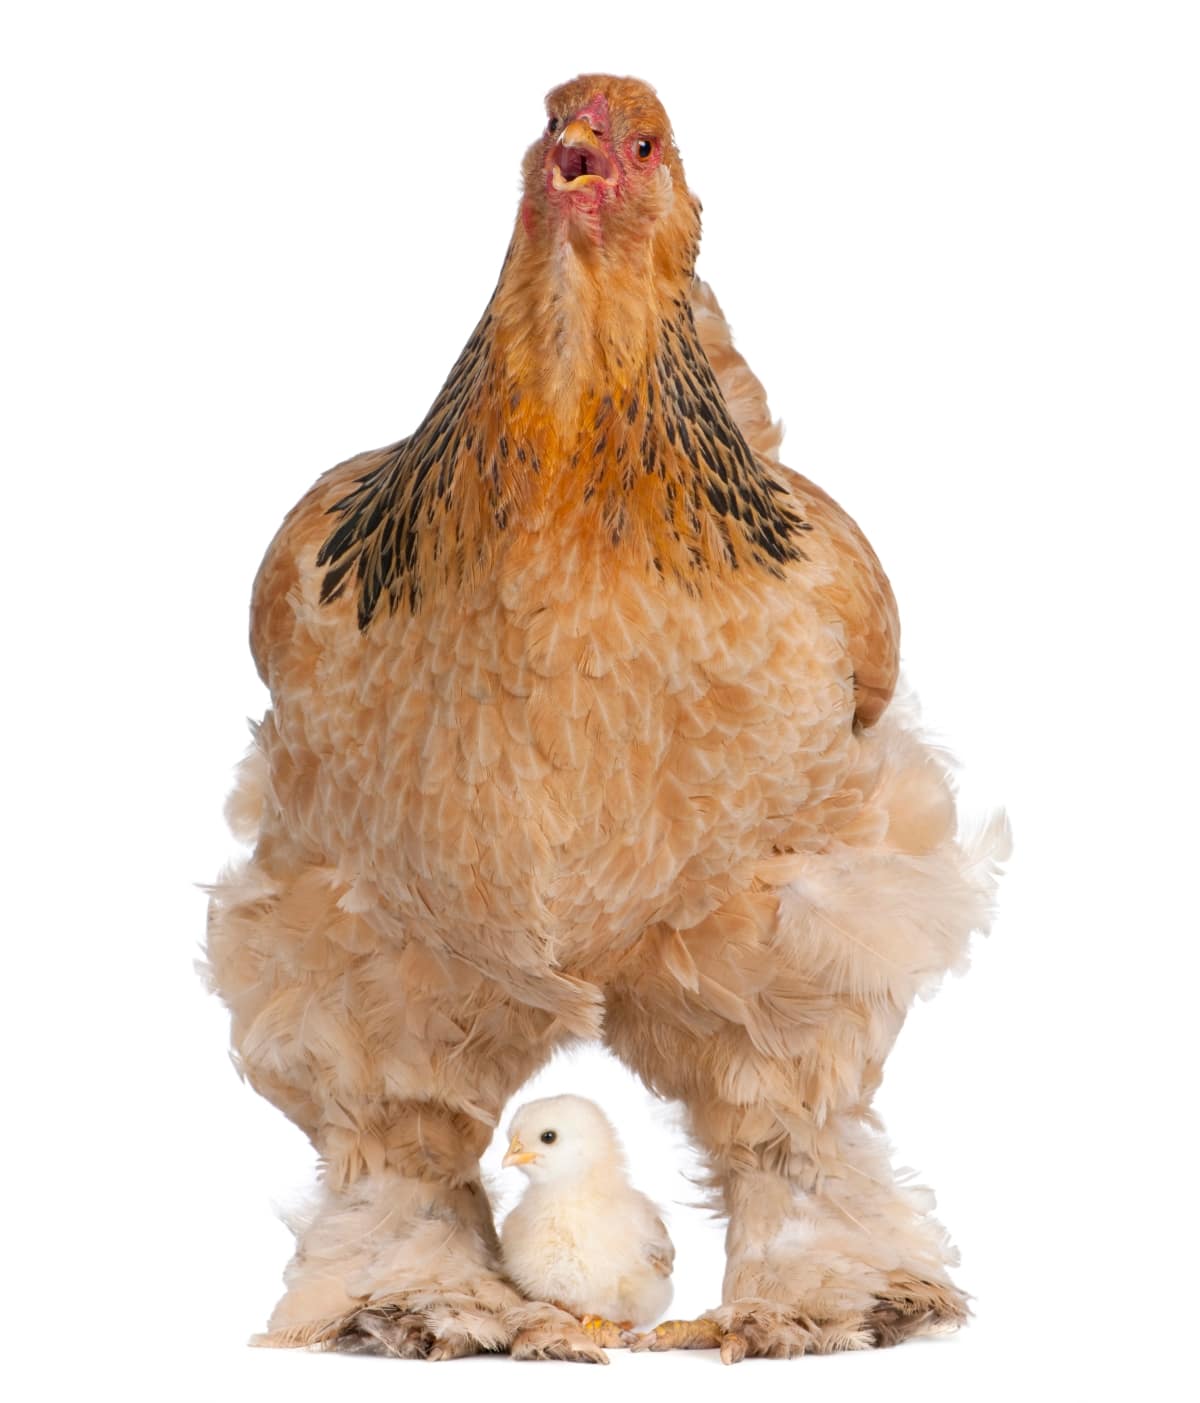 Ultimate Guide to Raising Brahma Chickens: Care, Feeding, Egg